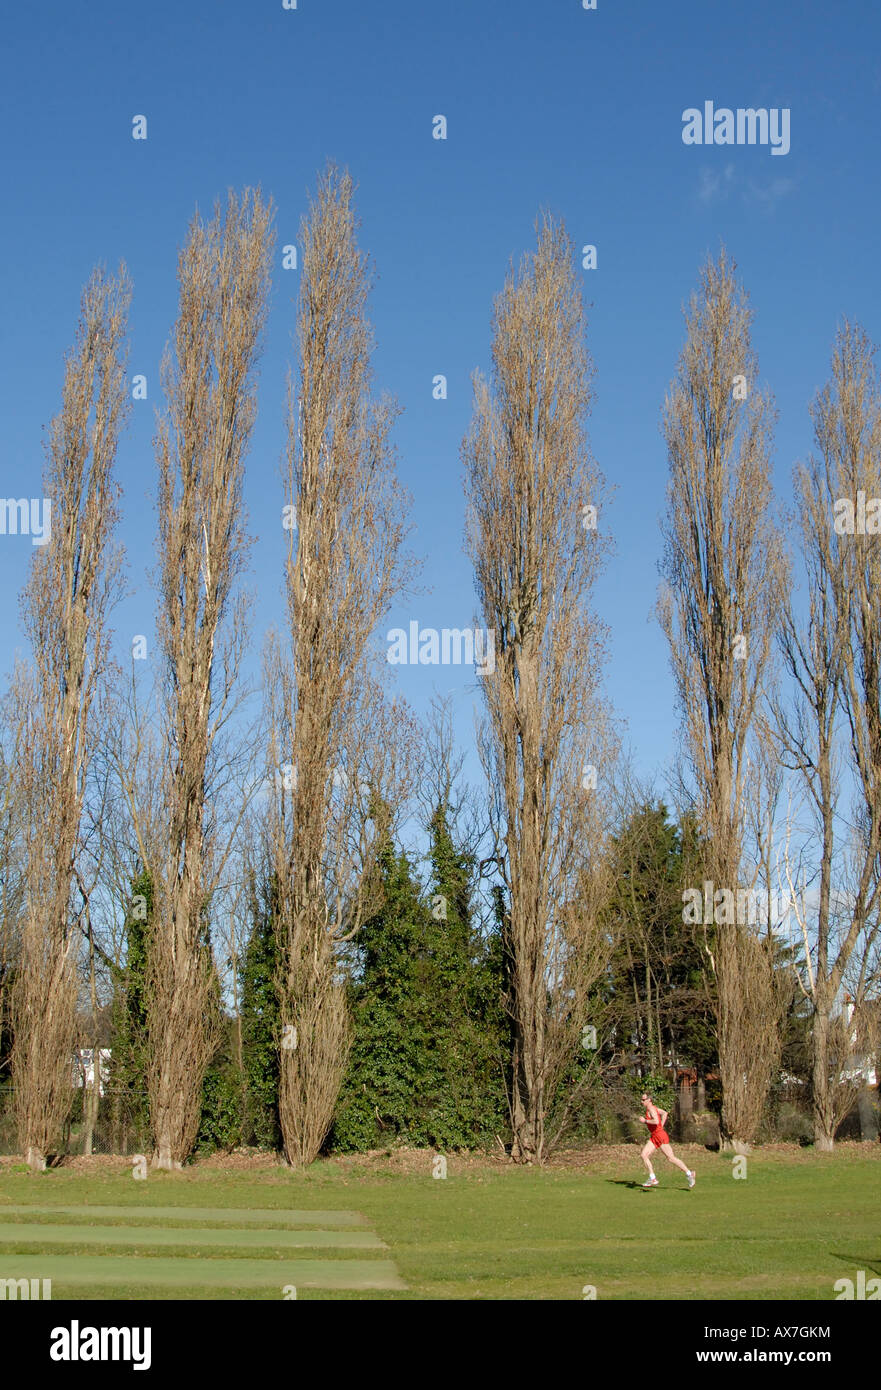 Line of Lombardy Poplar trees against blue sky, with air borne jogger running at edge of sports field below, Cheam, south London Stock Photo